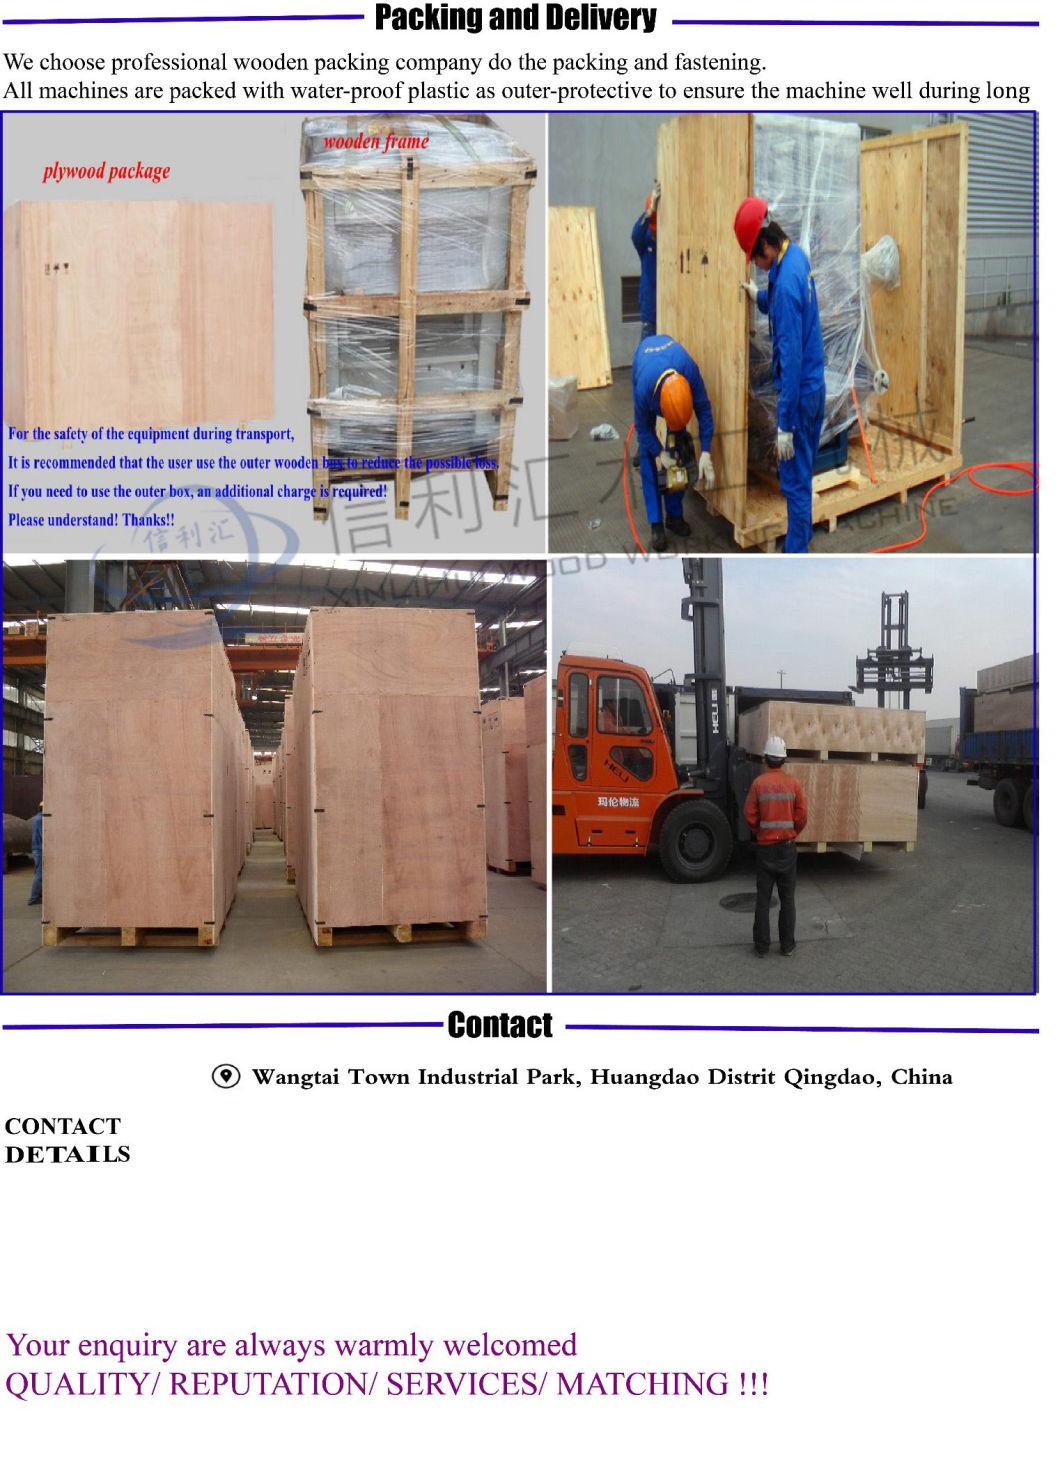 Plastic Films/Windows Film Cutting and Rolling Splitting Machine/ Wooden Membrane Slitting Machine for Wrapping/ Wood Working Dividing and Cutting Machine